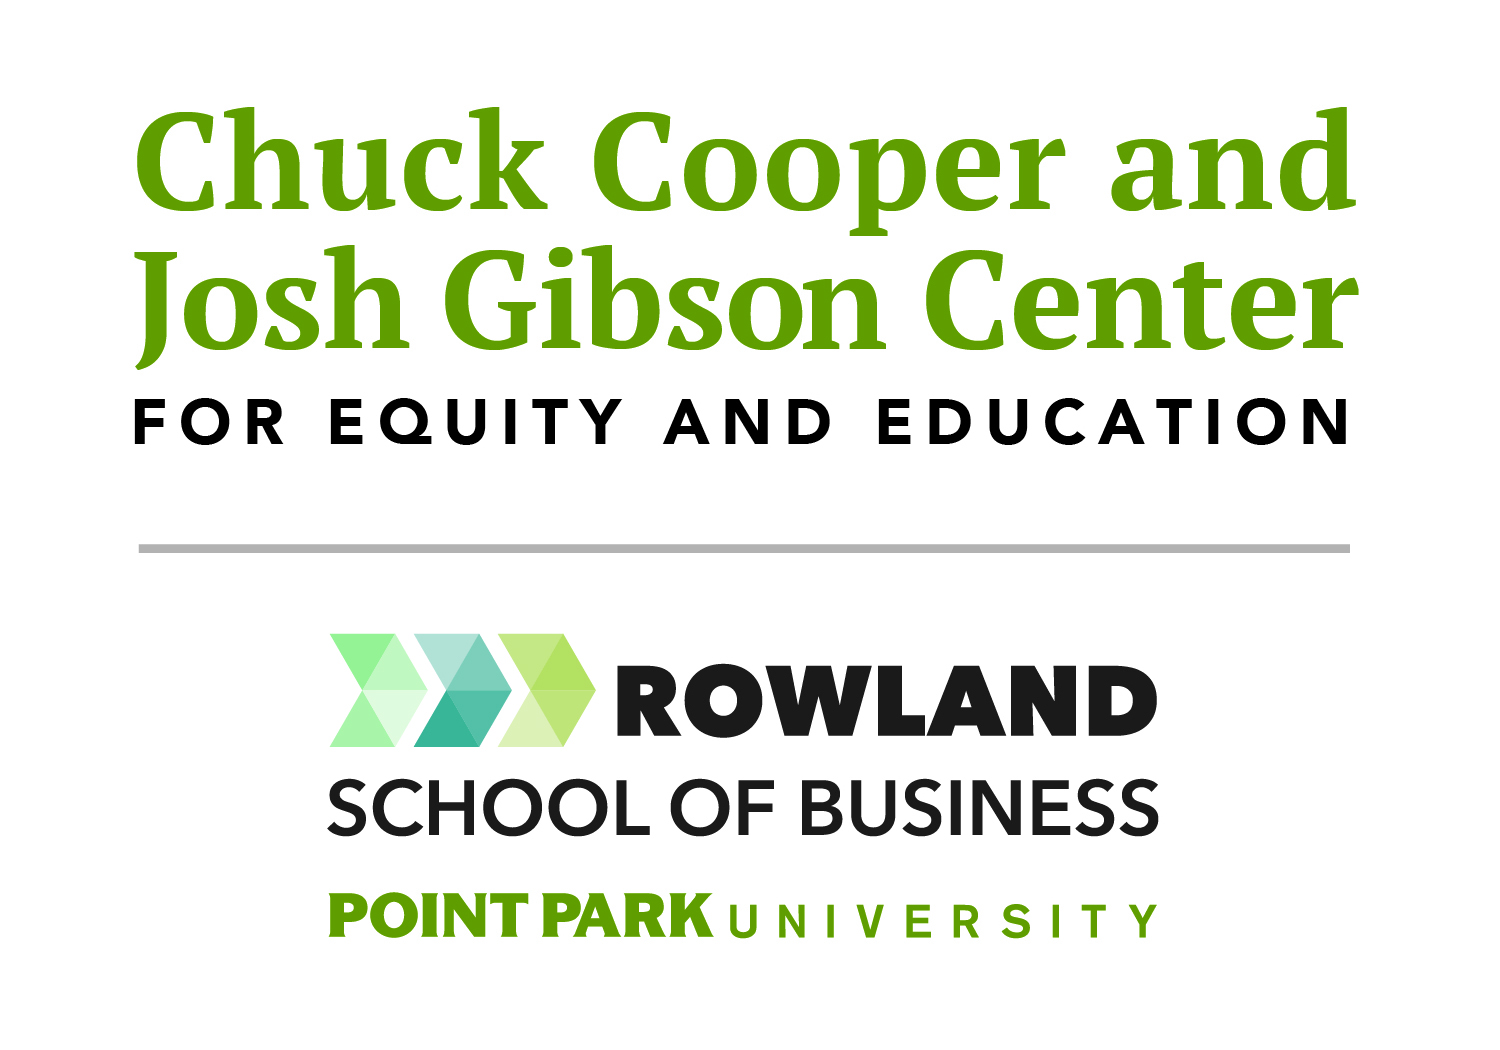 Pictured is the Chuck Cooper and Josh Gibson Center for Equity and Education logo. File photo.